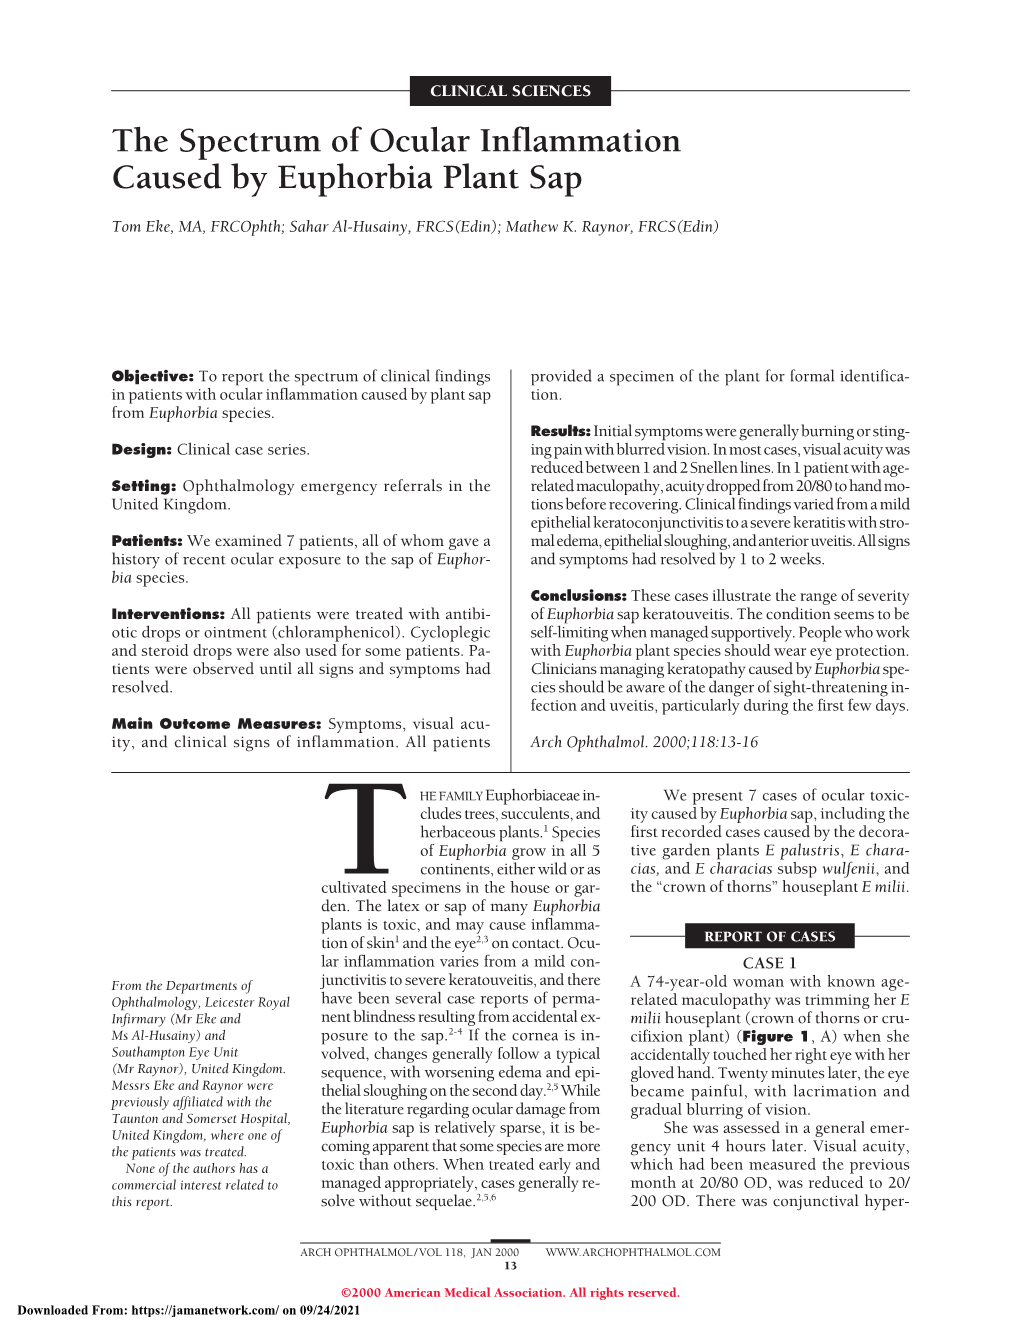 The Spectrum of Ocular Inflammation Caused by Euphorbia Plant Sap